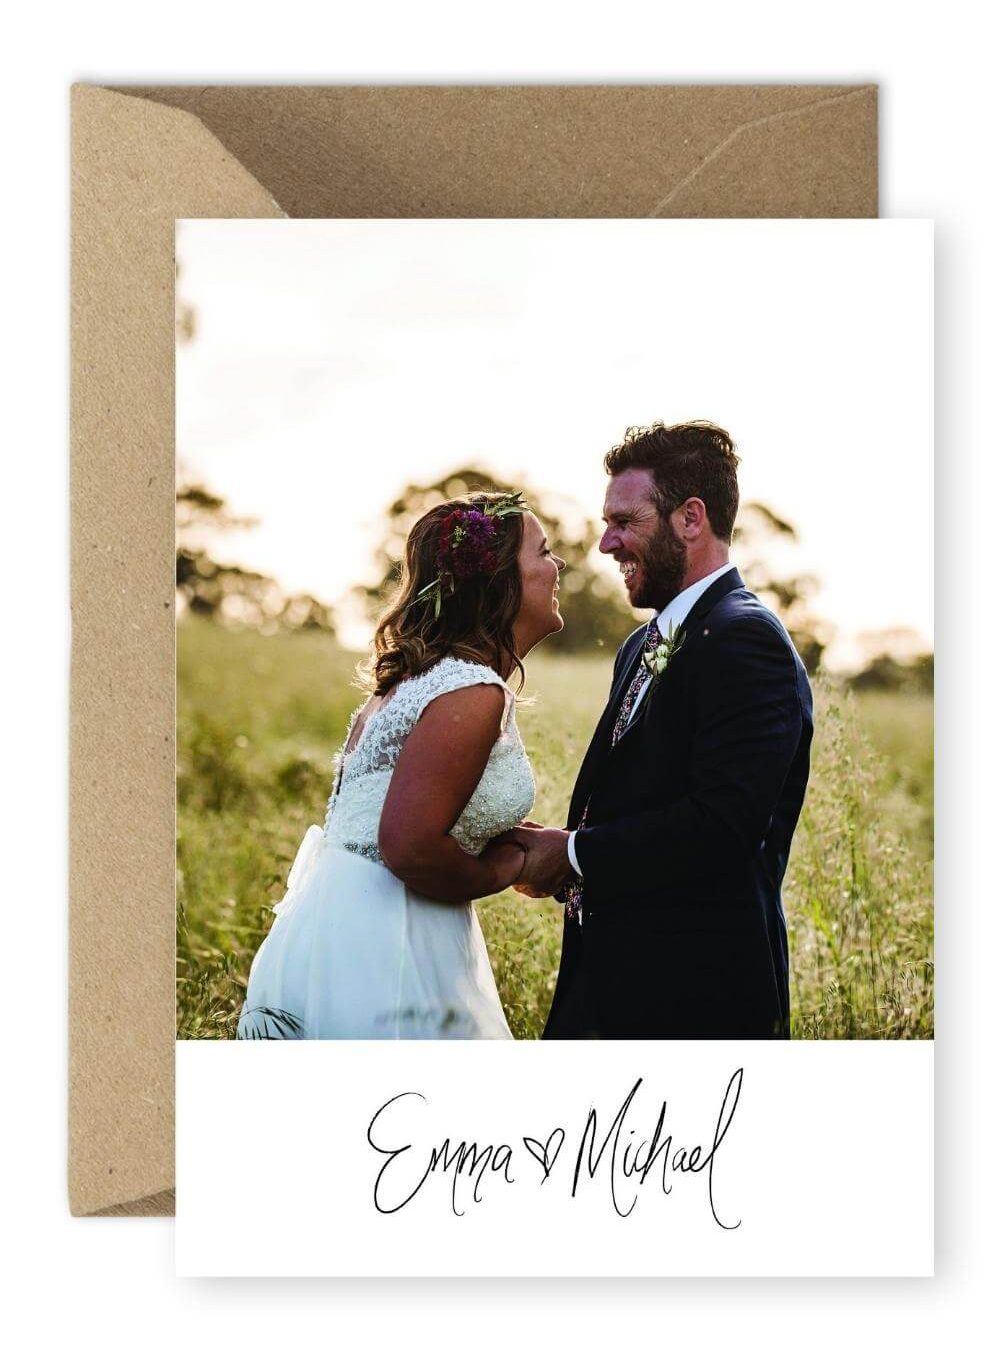 Wedding Thank You Cards for Guests who Didn't Attend For the Love of Stationery Kelly Champion Photography